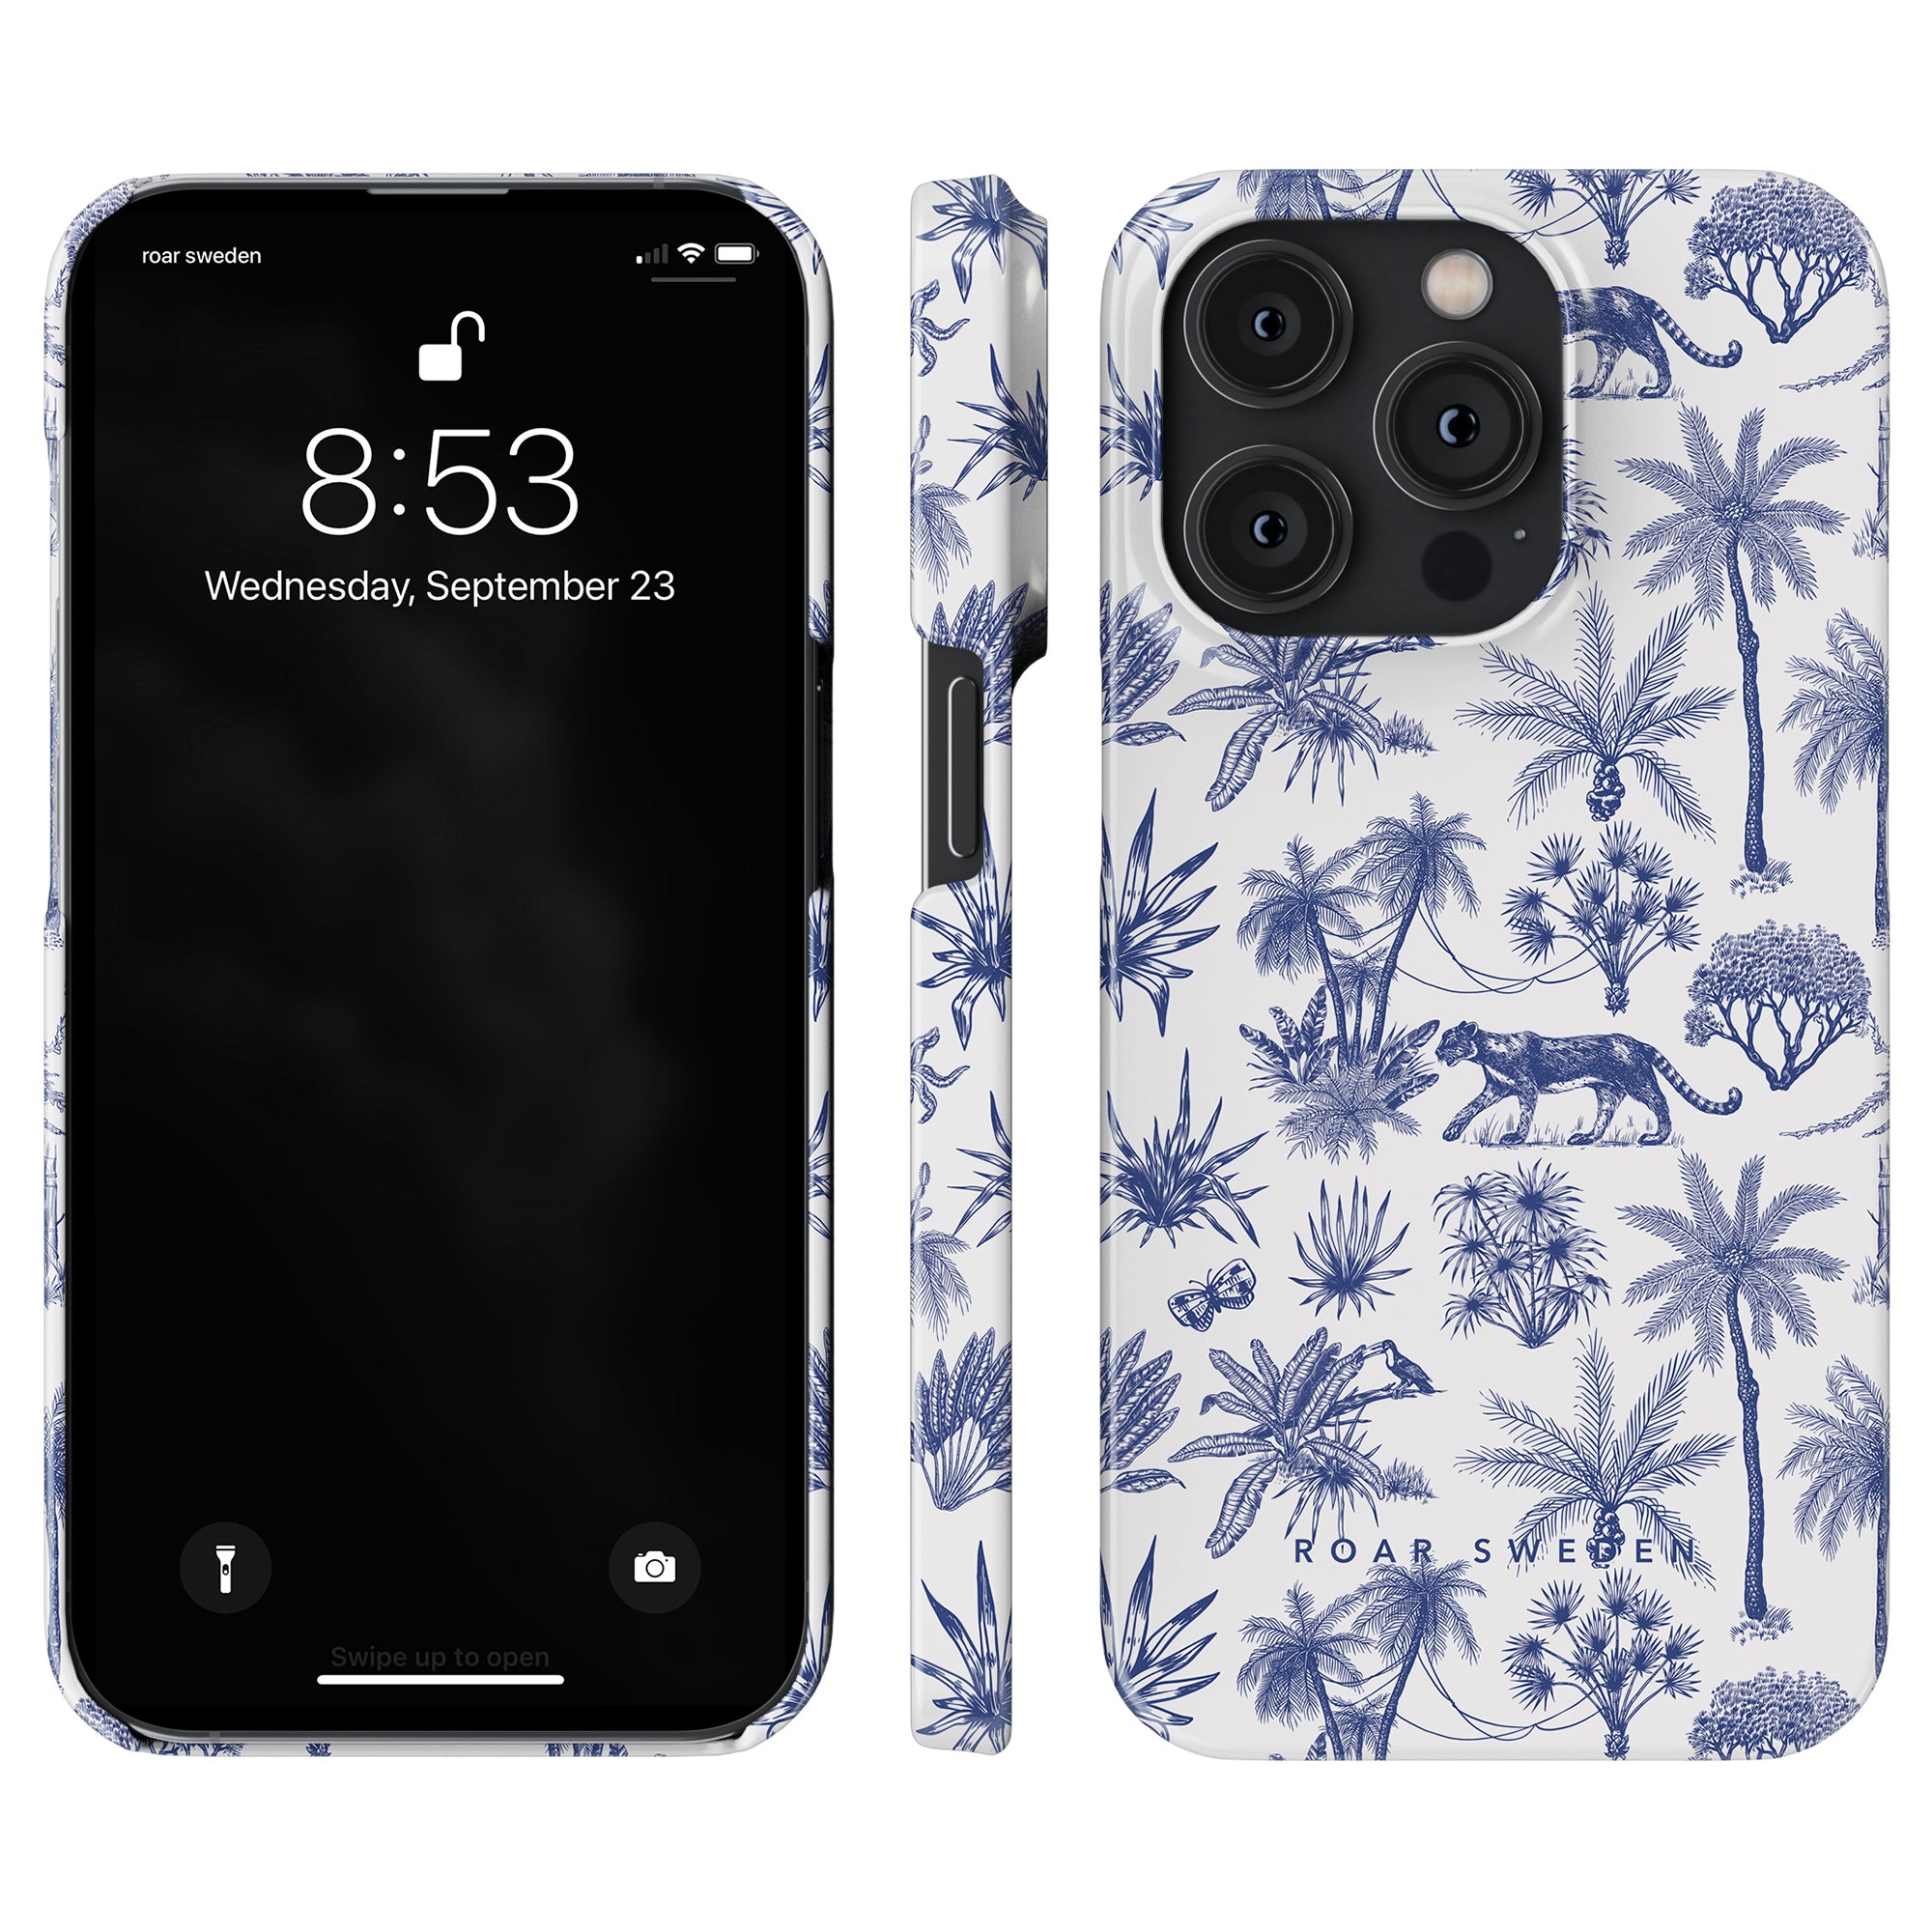 A waterproof smartphone with a black screen displaying the time and date, paired with a Toile De Jouy - Slim case featuring a blue and white tropical print design.